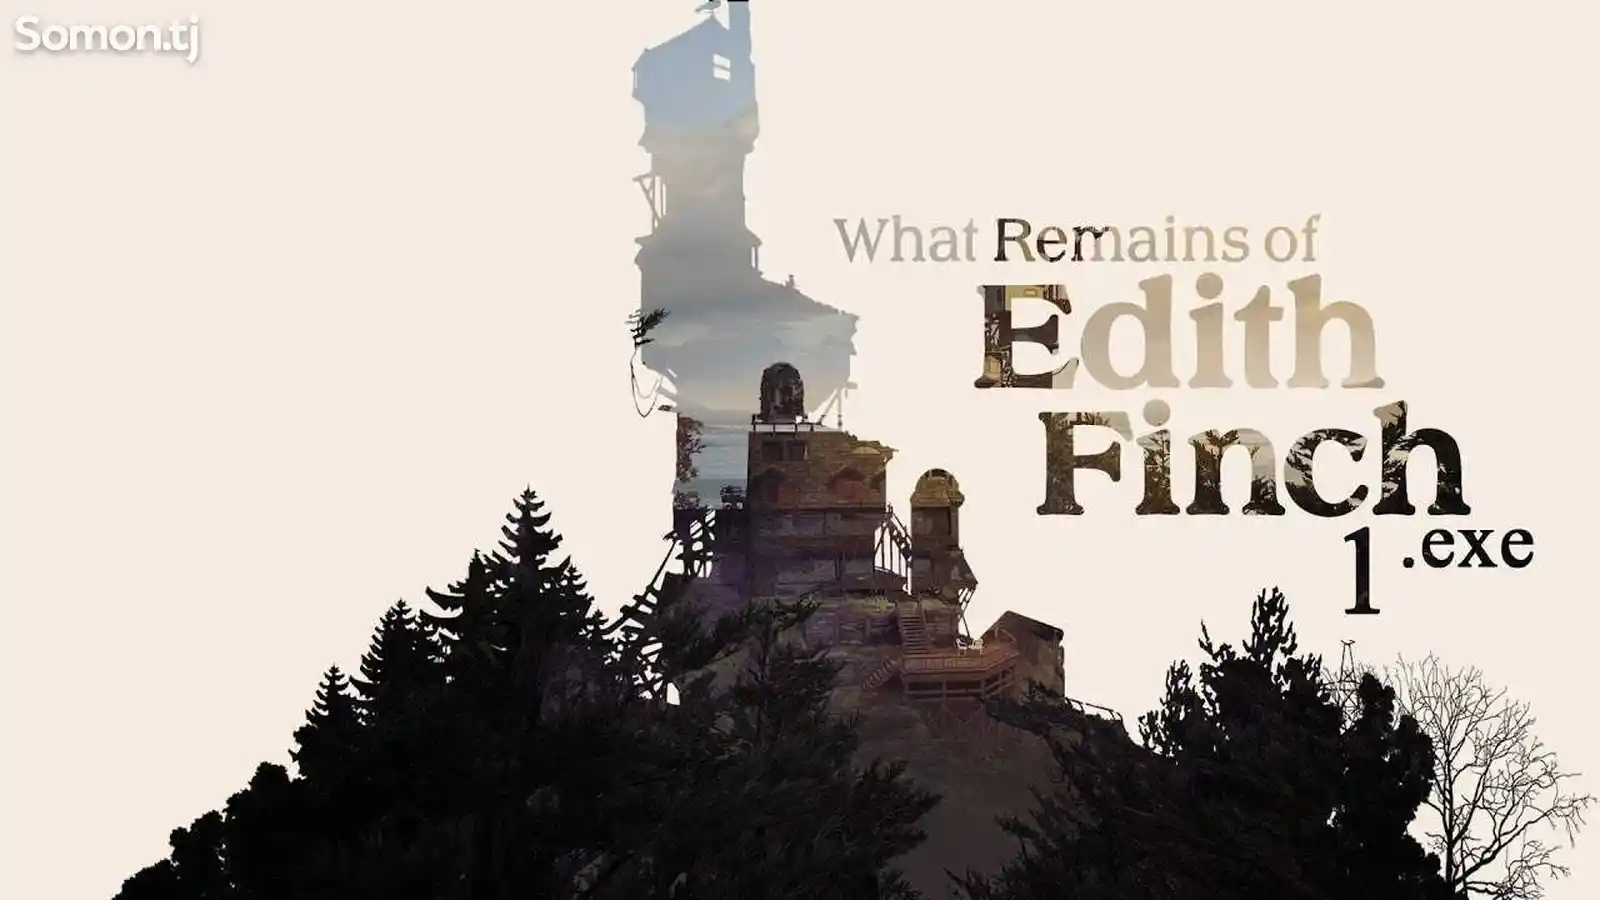 Игра What Remains of Edith Finch для PS-4 /5.05 / 6.72 / 7.02 / 7.55 / 9.00 /